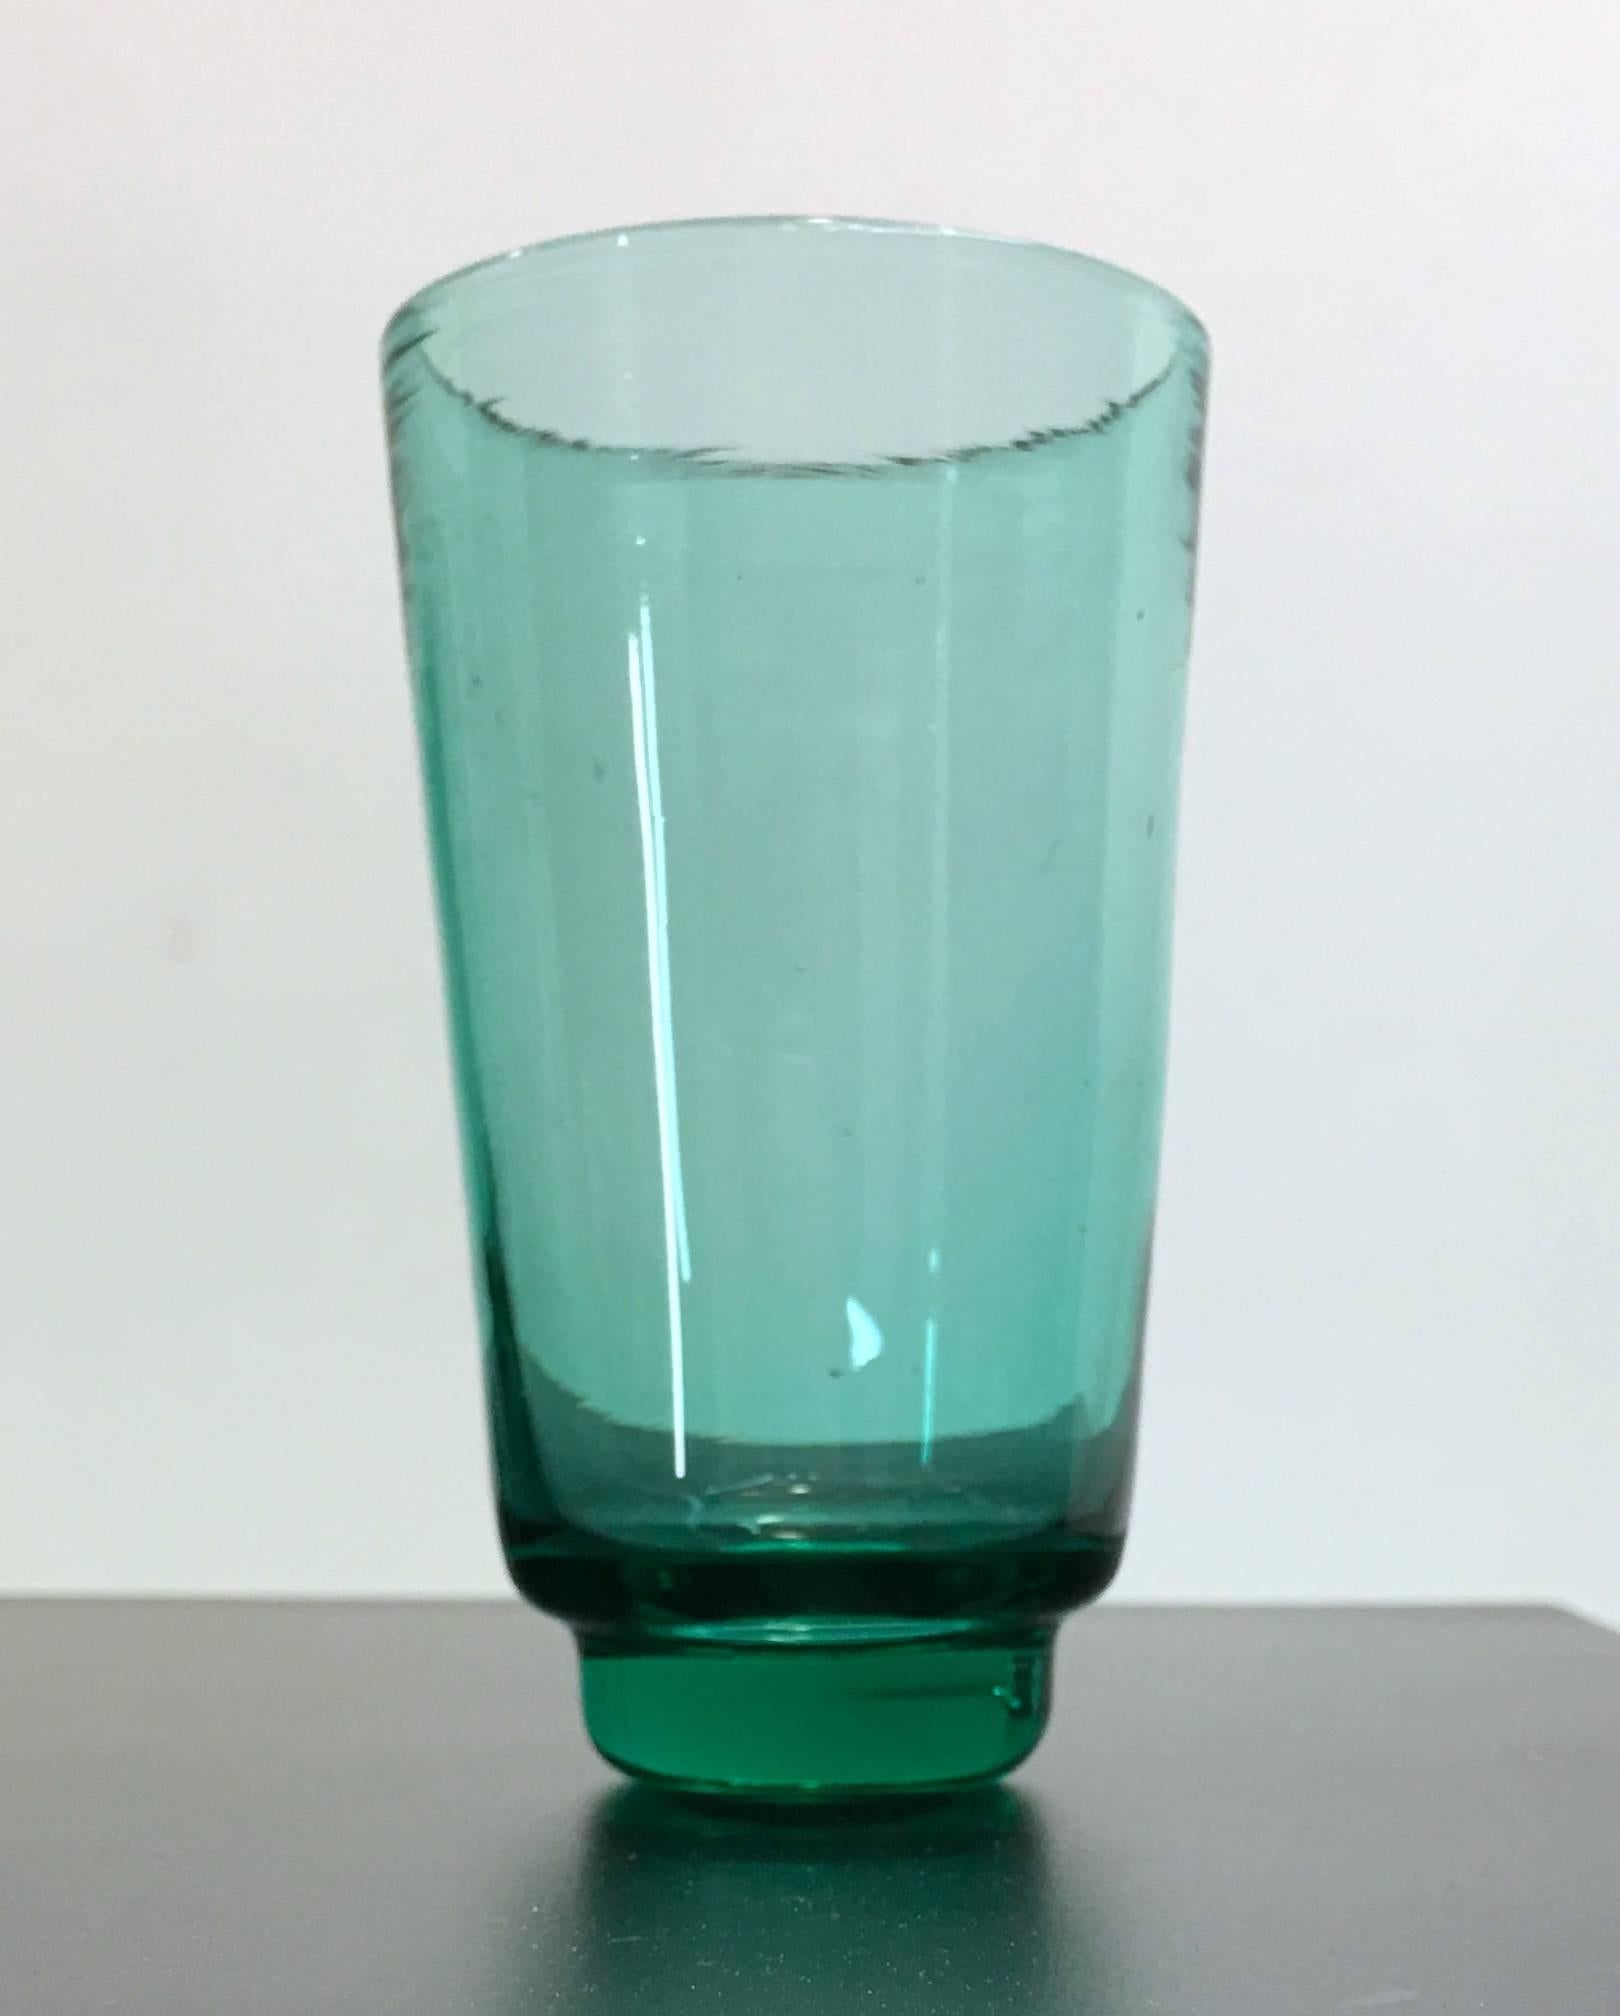 This unique set of unfooted tumblers by Winslow Anderson for Blenko was produced circa 1947 and is uncommon due to the unfooted nature of the tumblers.

In a sea green glass color all pieces are in excellent condition.

Measure: Glasses measure